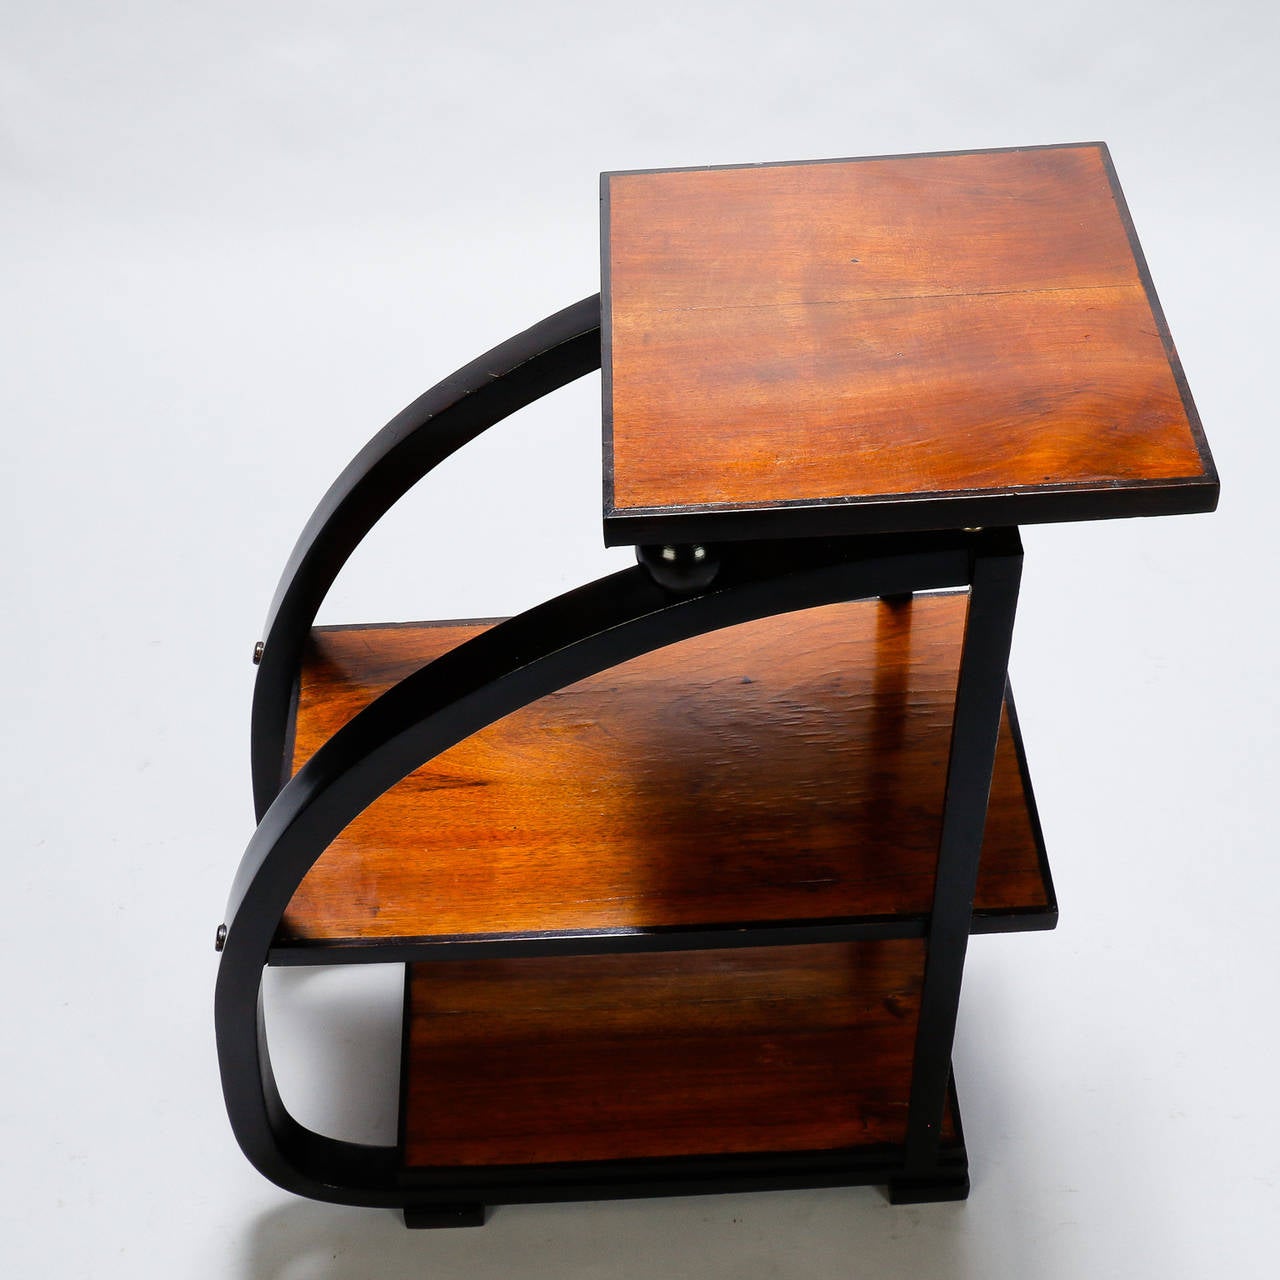 Circa 1930s French side table in wood that appears to be walnut with contrasting ebonised bentwood frame and three tiers.